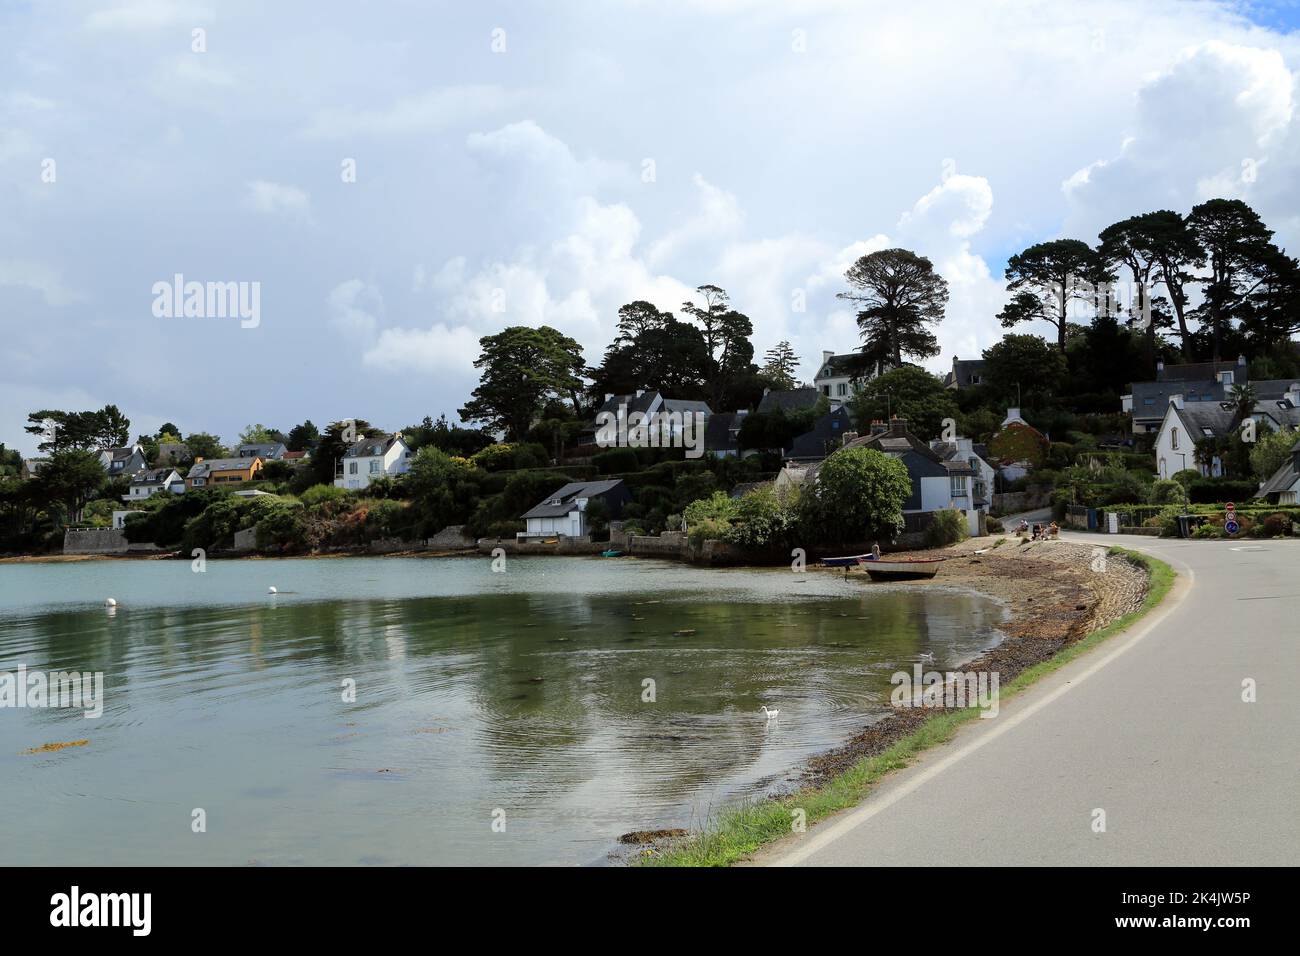 View of Le Bourg and beach from Rue Benoni Praud, Ile Aux Moines, Golfe du Morbihan, Morbihan, Brittany, France Stock Photo